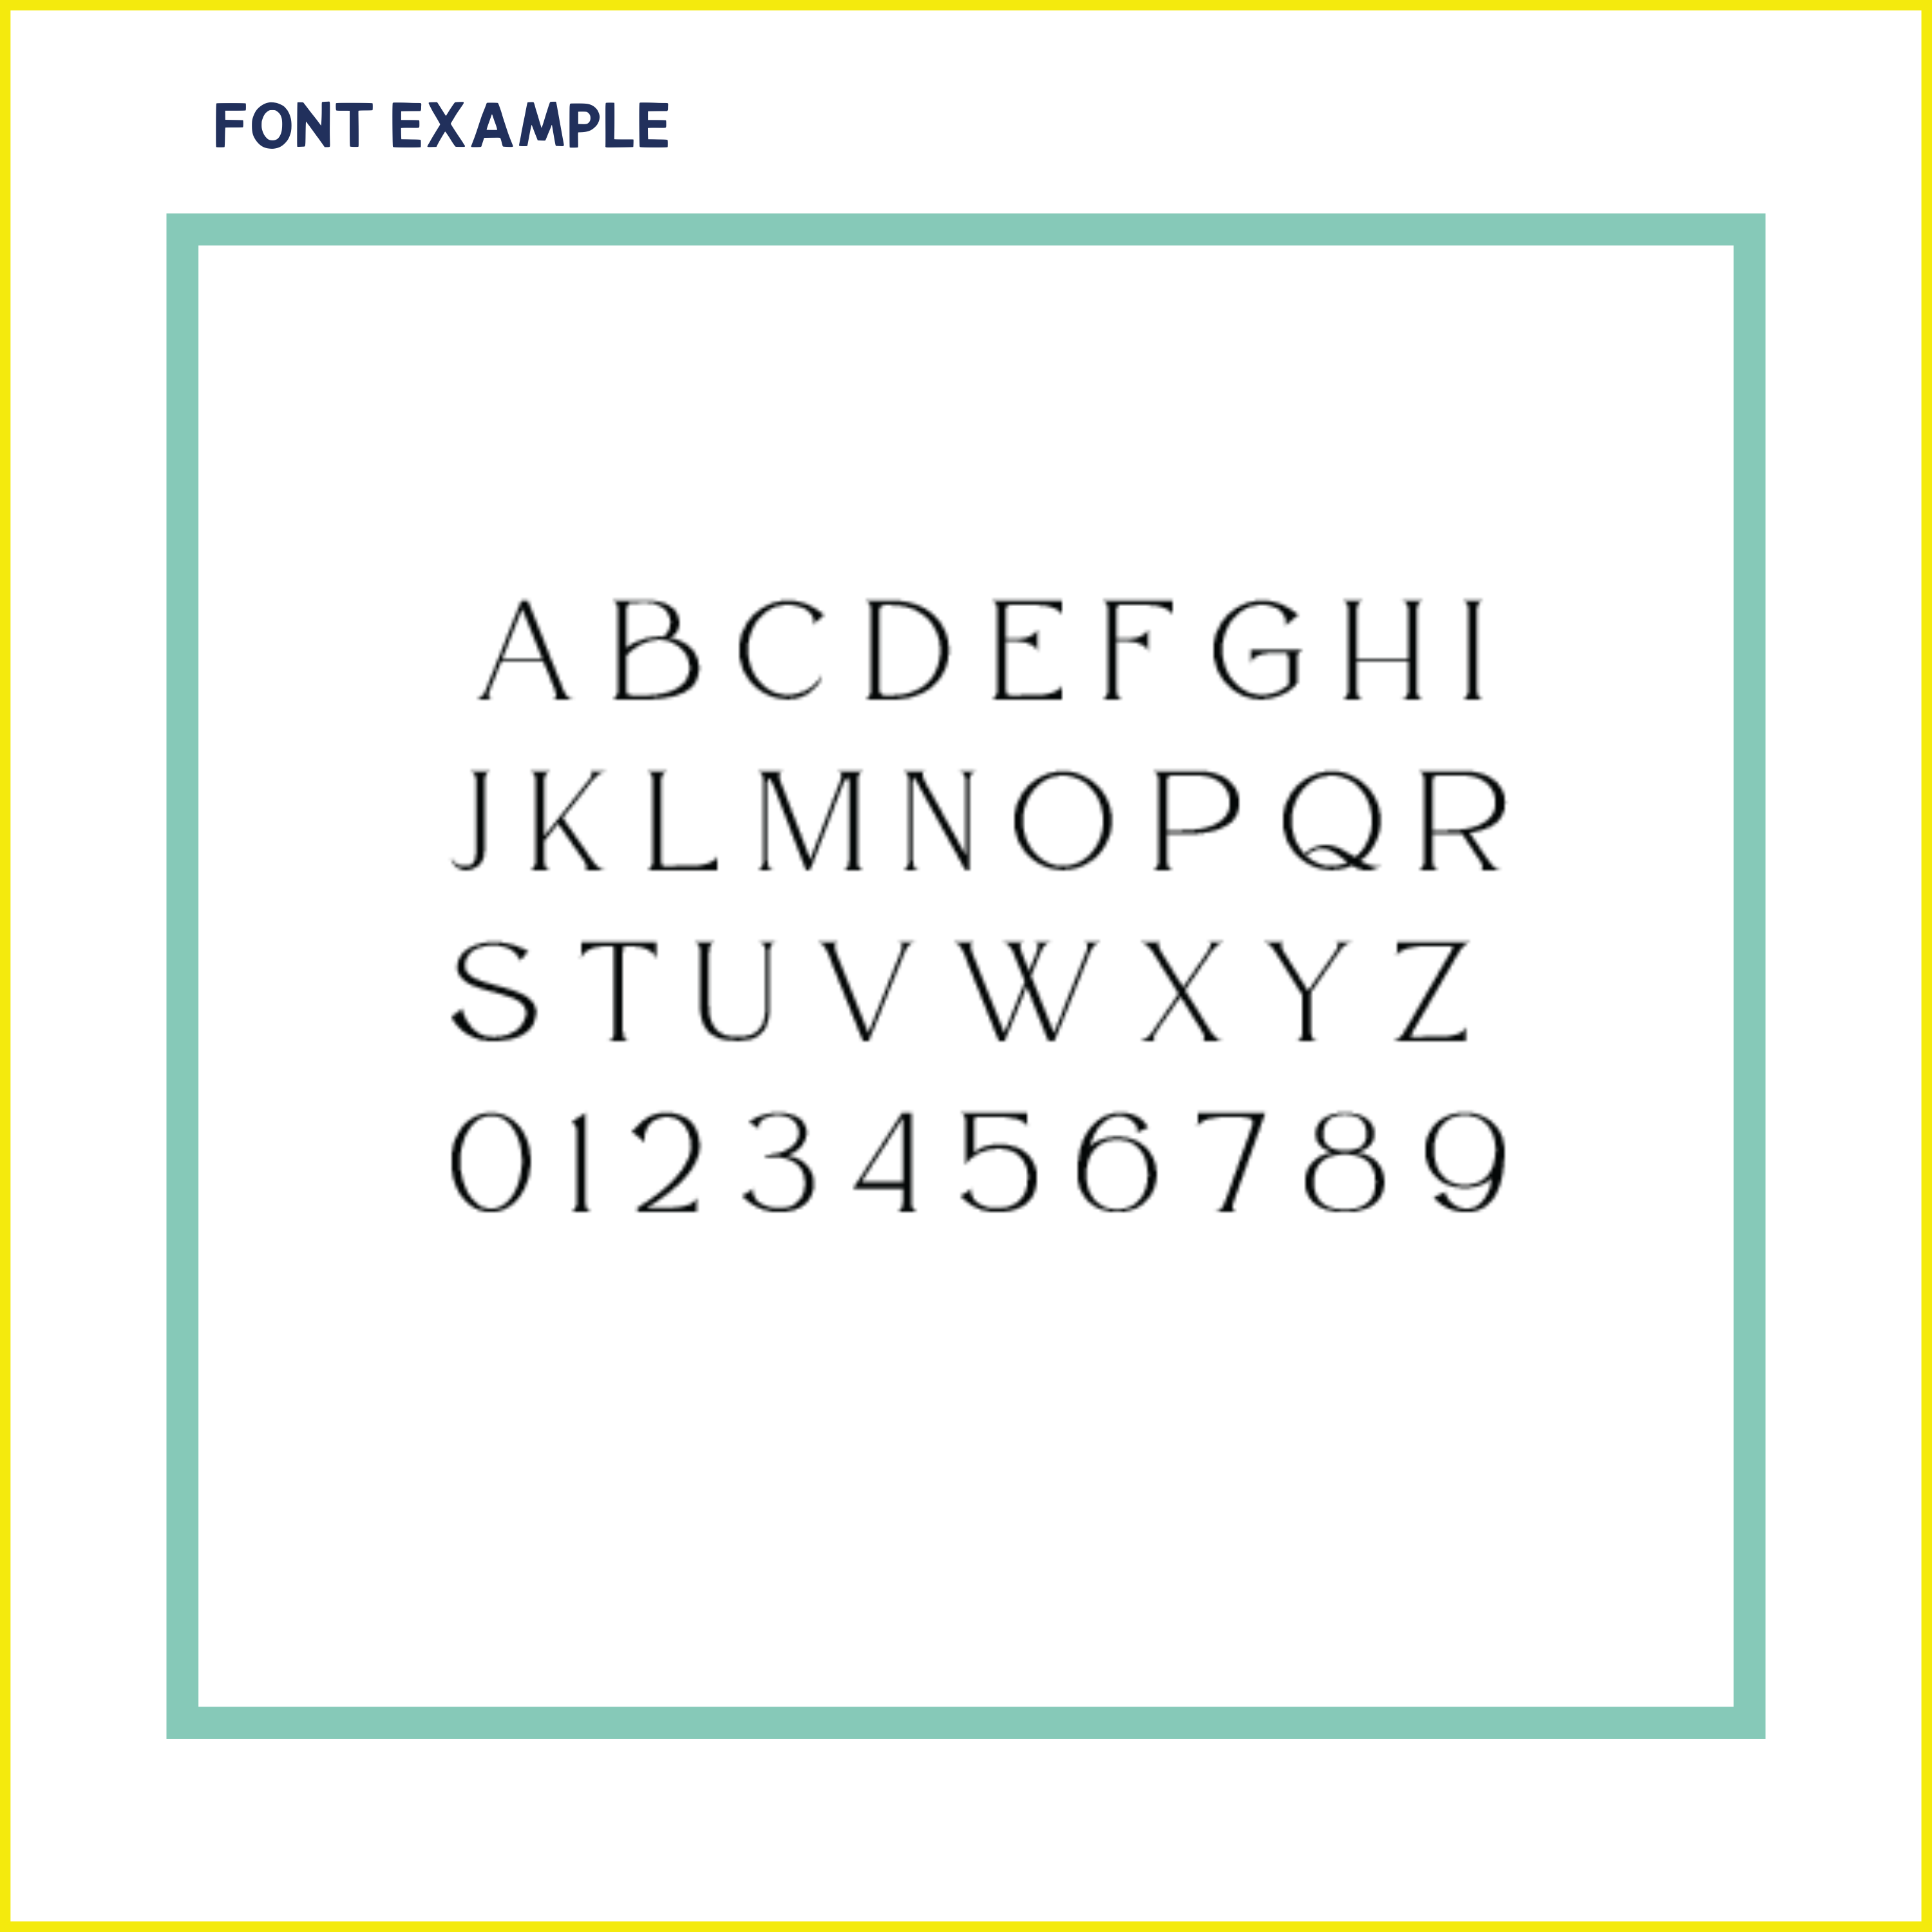 Example of font alphabet for hello world book